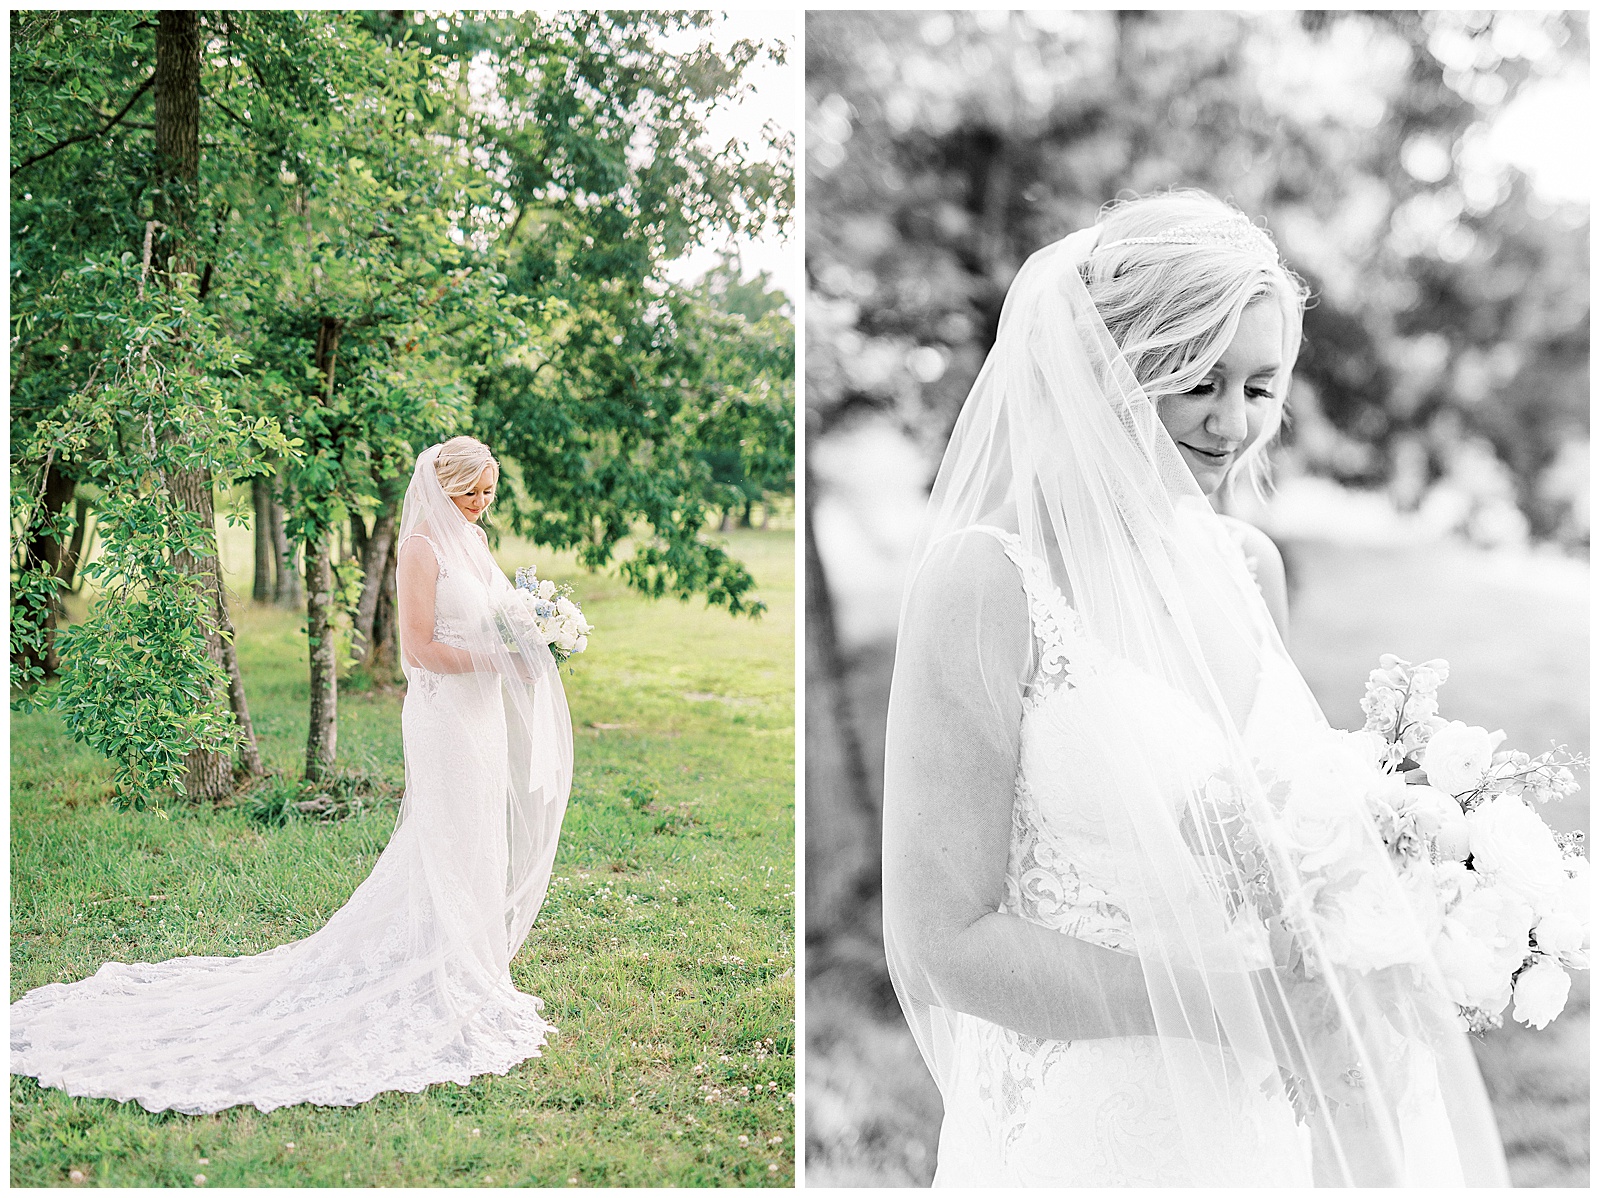 long veil white lace dress blonde haired updo bride poses in Summer Forest Outdoor Bridal Session